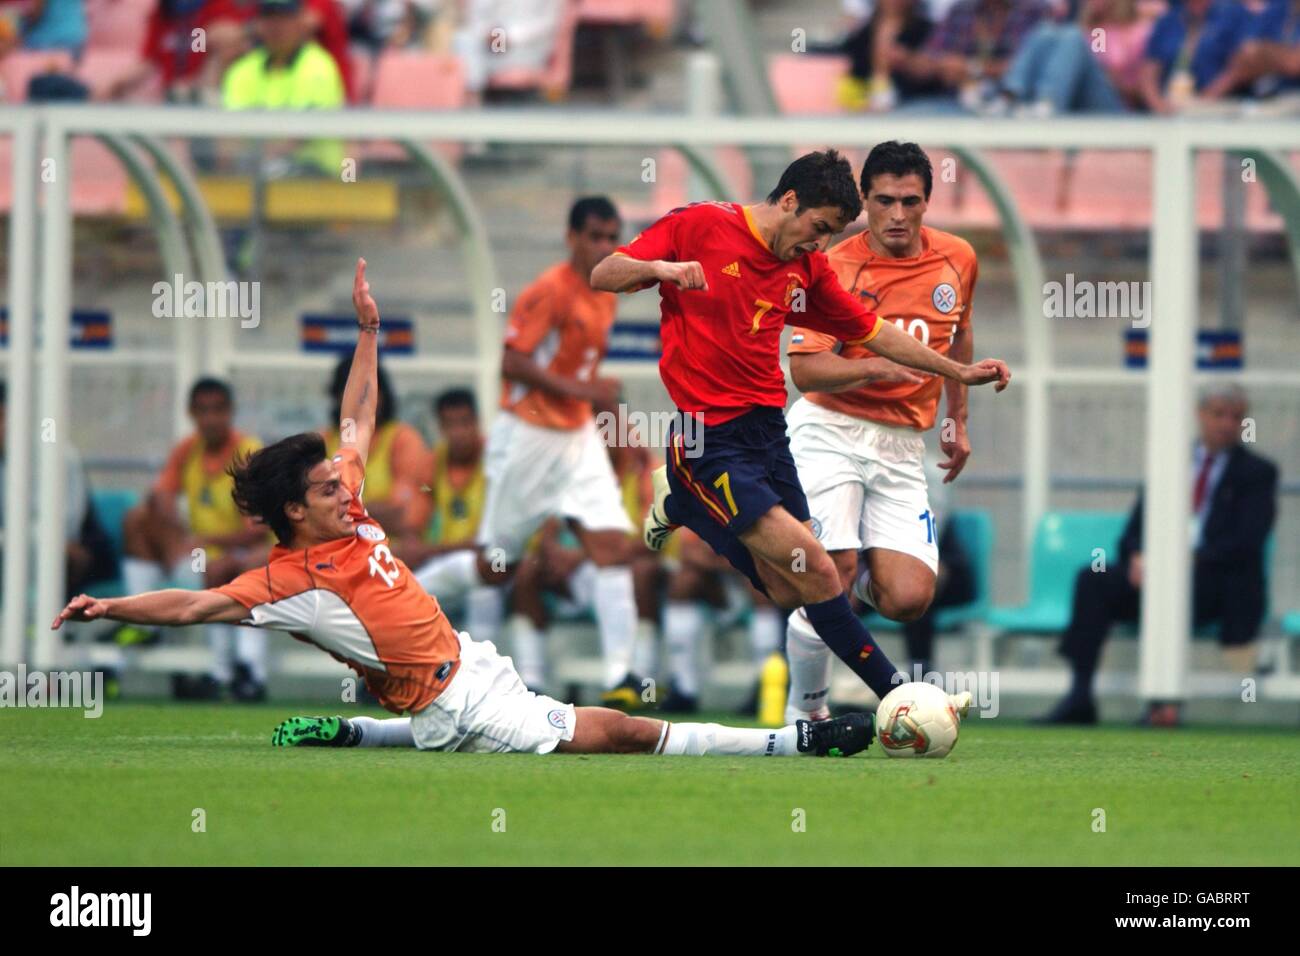 Soccer - FIFA World Cup 2002 - Group B - Spain v Paraguay. Spain's Raul is tackled by Paraguay's Carlos Paredes Stock Photo